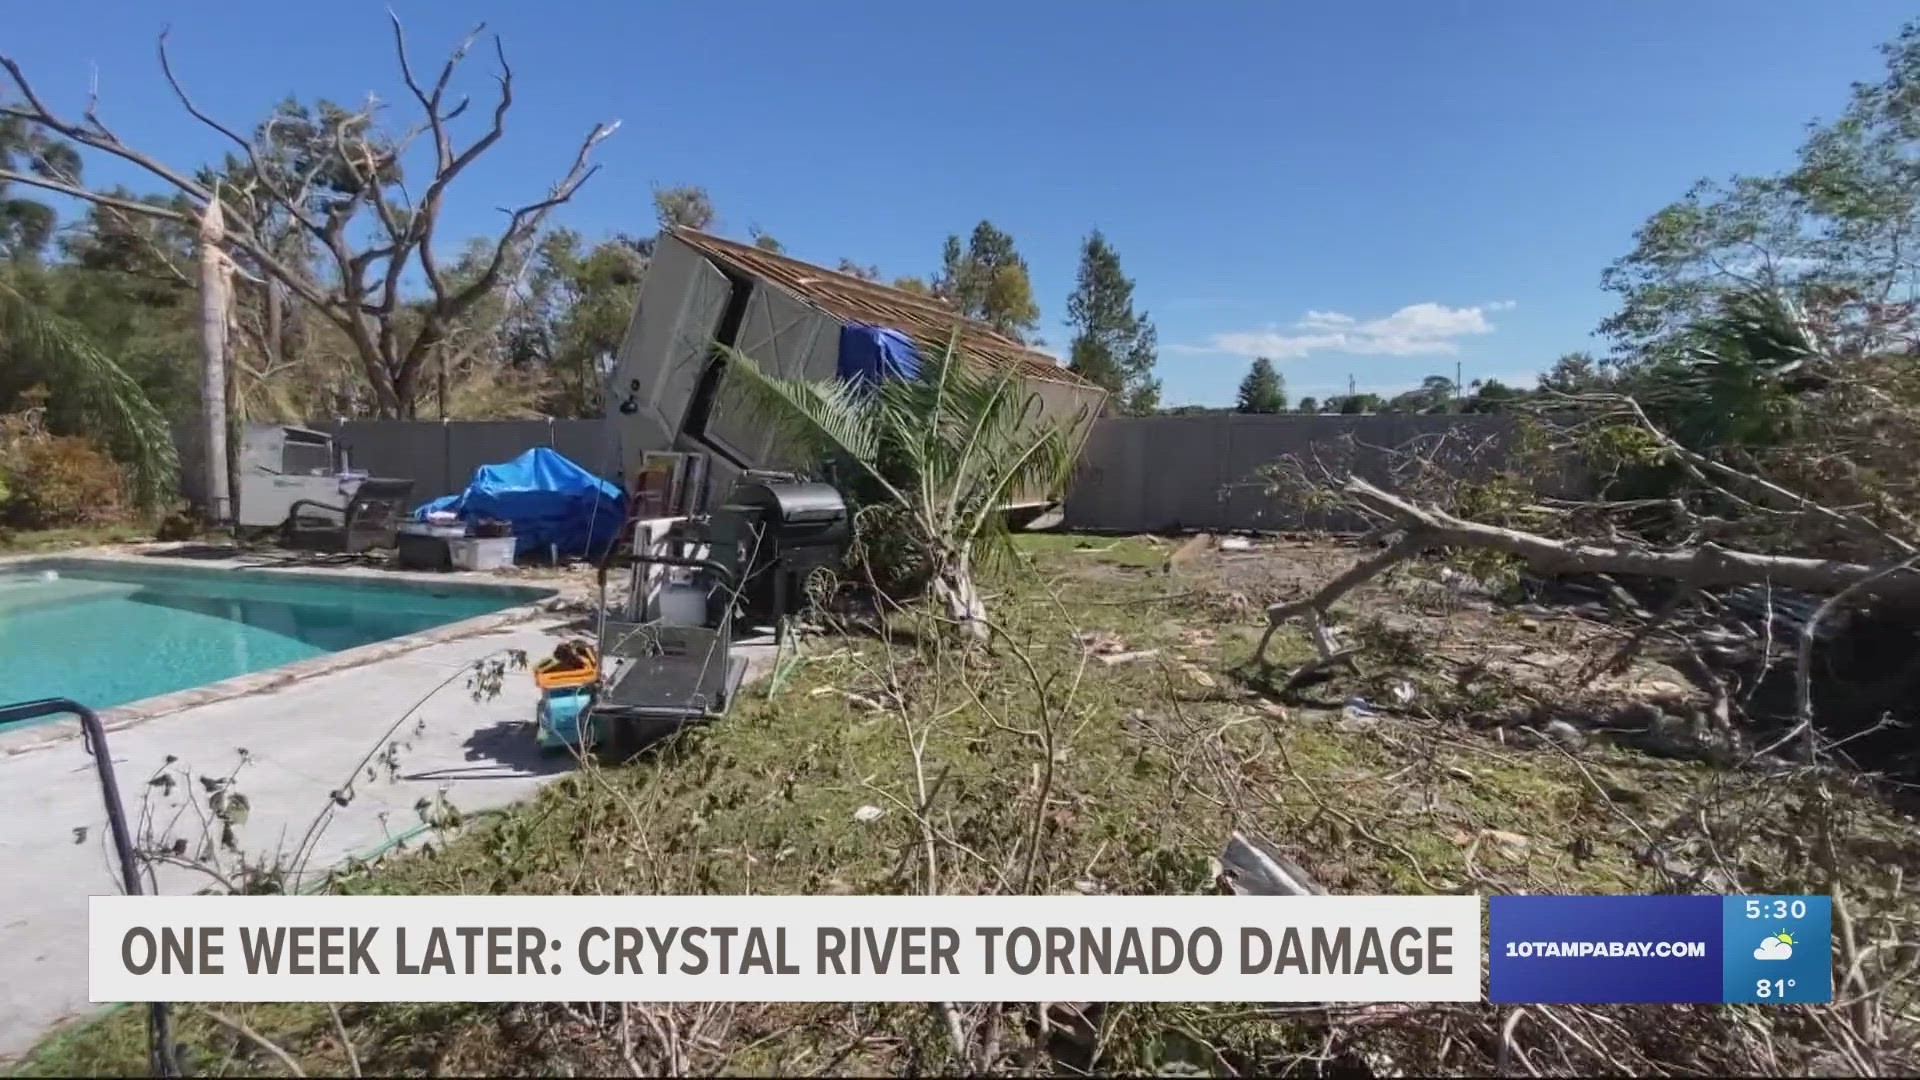 The National Weather Service said at least two tornadoes touched down in the Tampa Bay area.